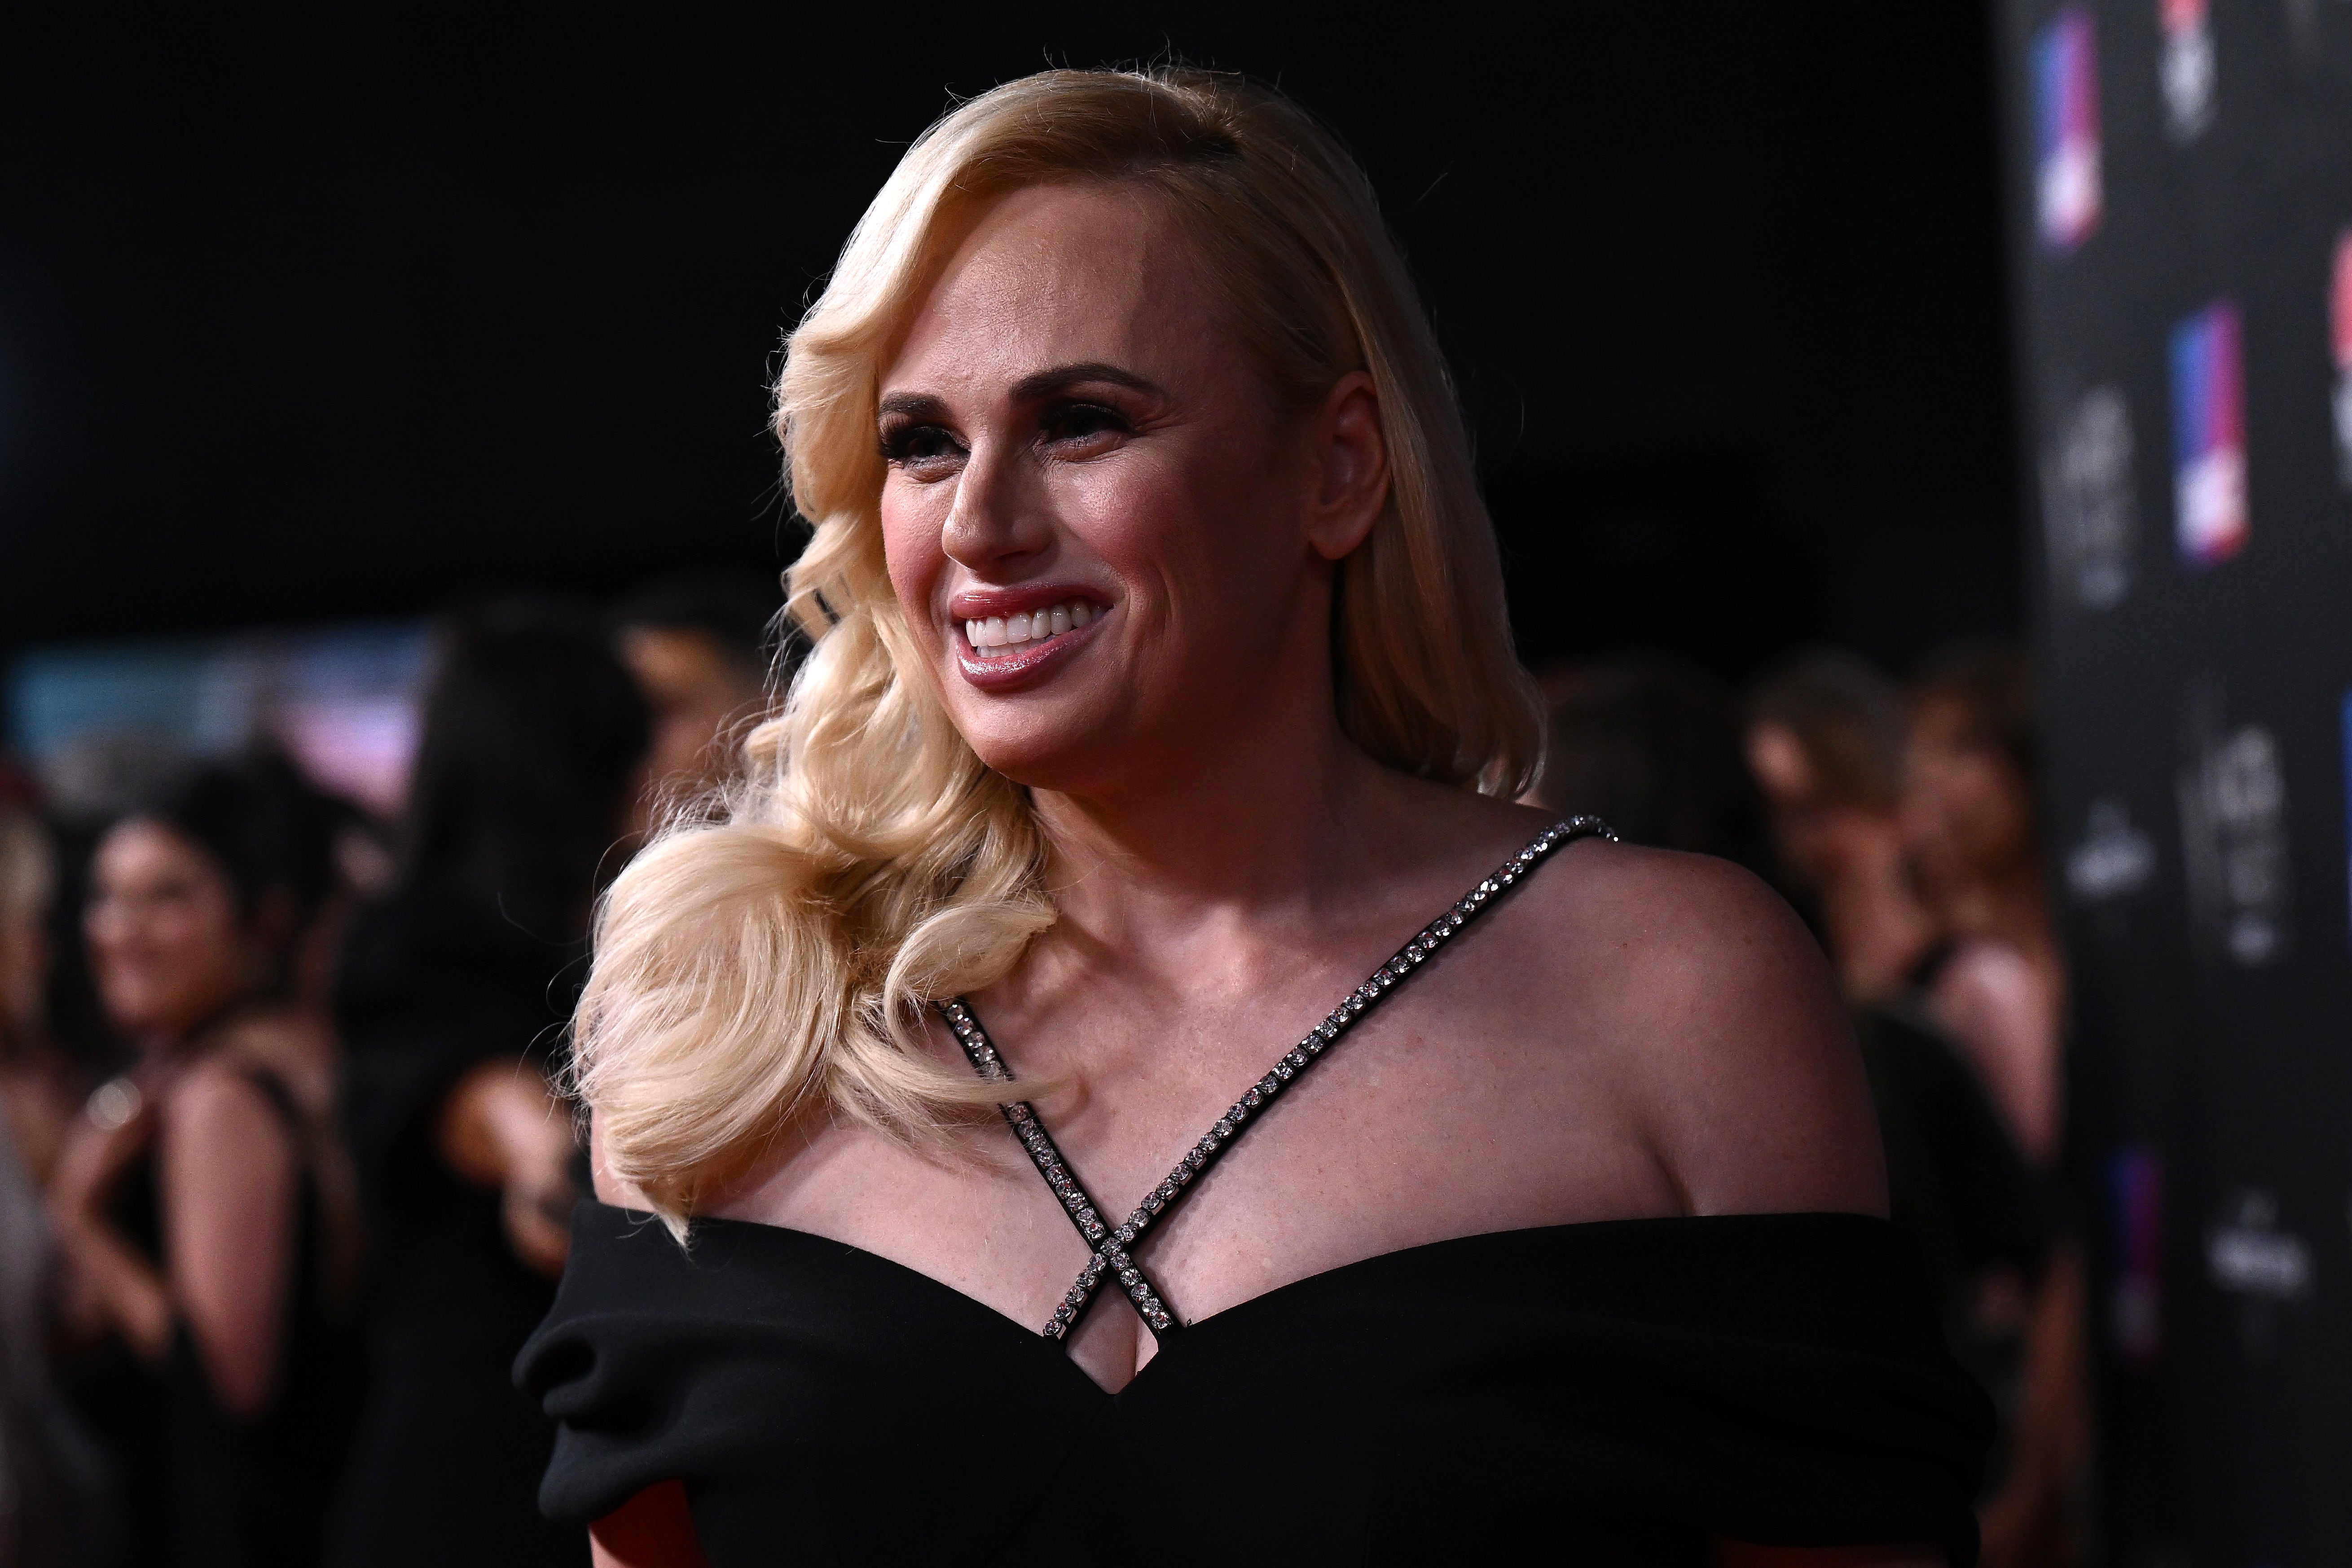 Rebel Wilson says 'Pitch Perfect' contract didn't allow her to lose or gain 'more than 10 pounds'